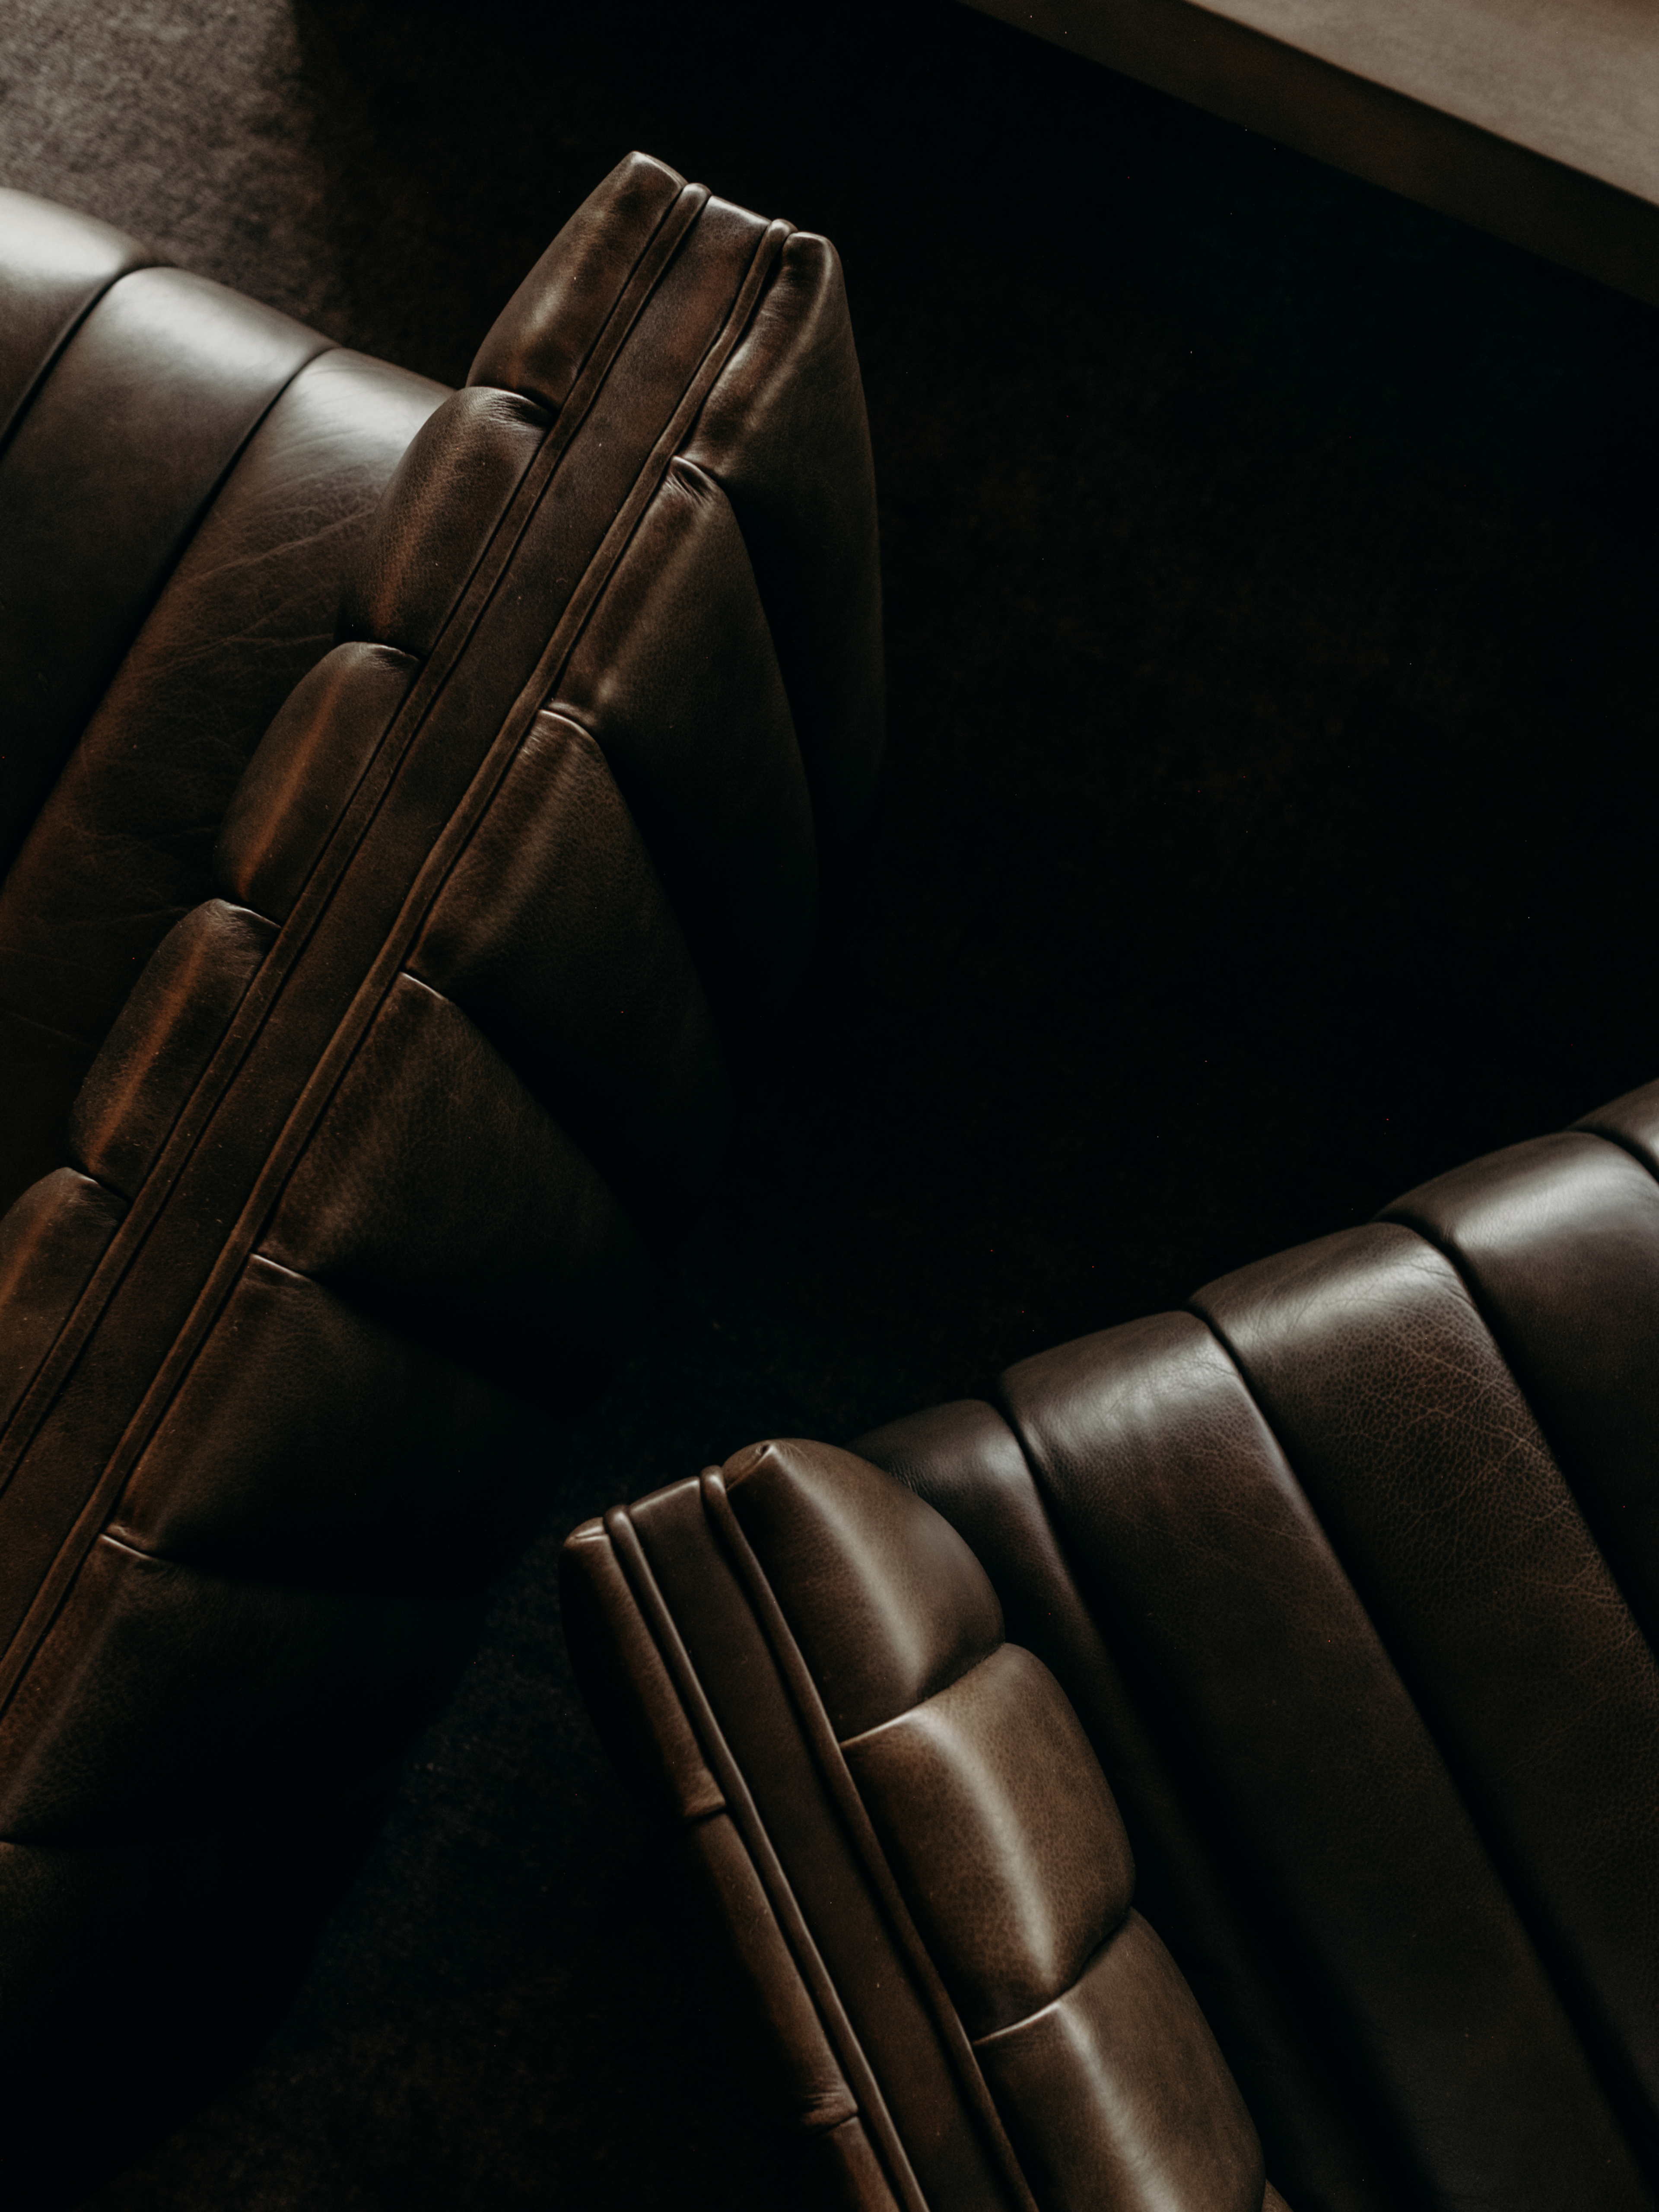 Bird's eye view of two brown leather chairs